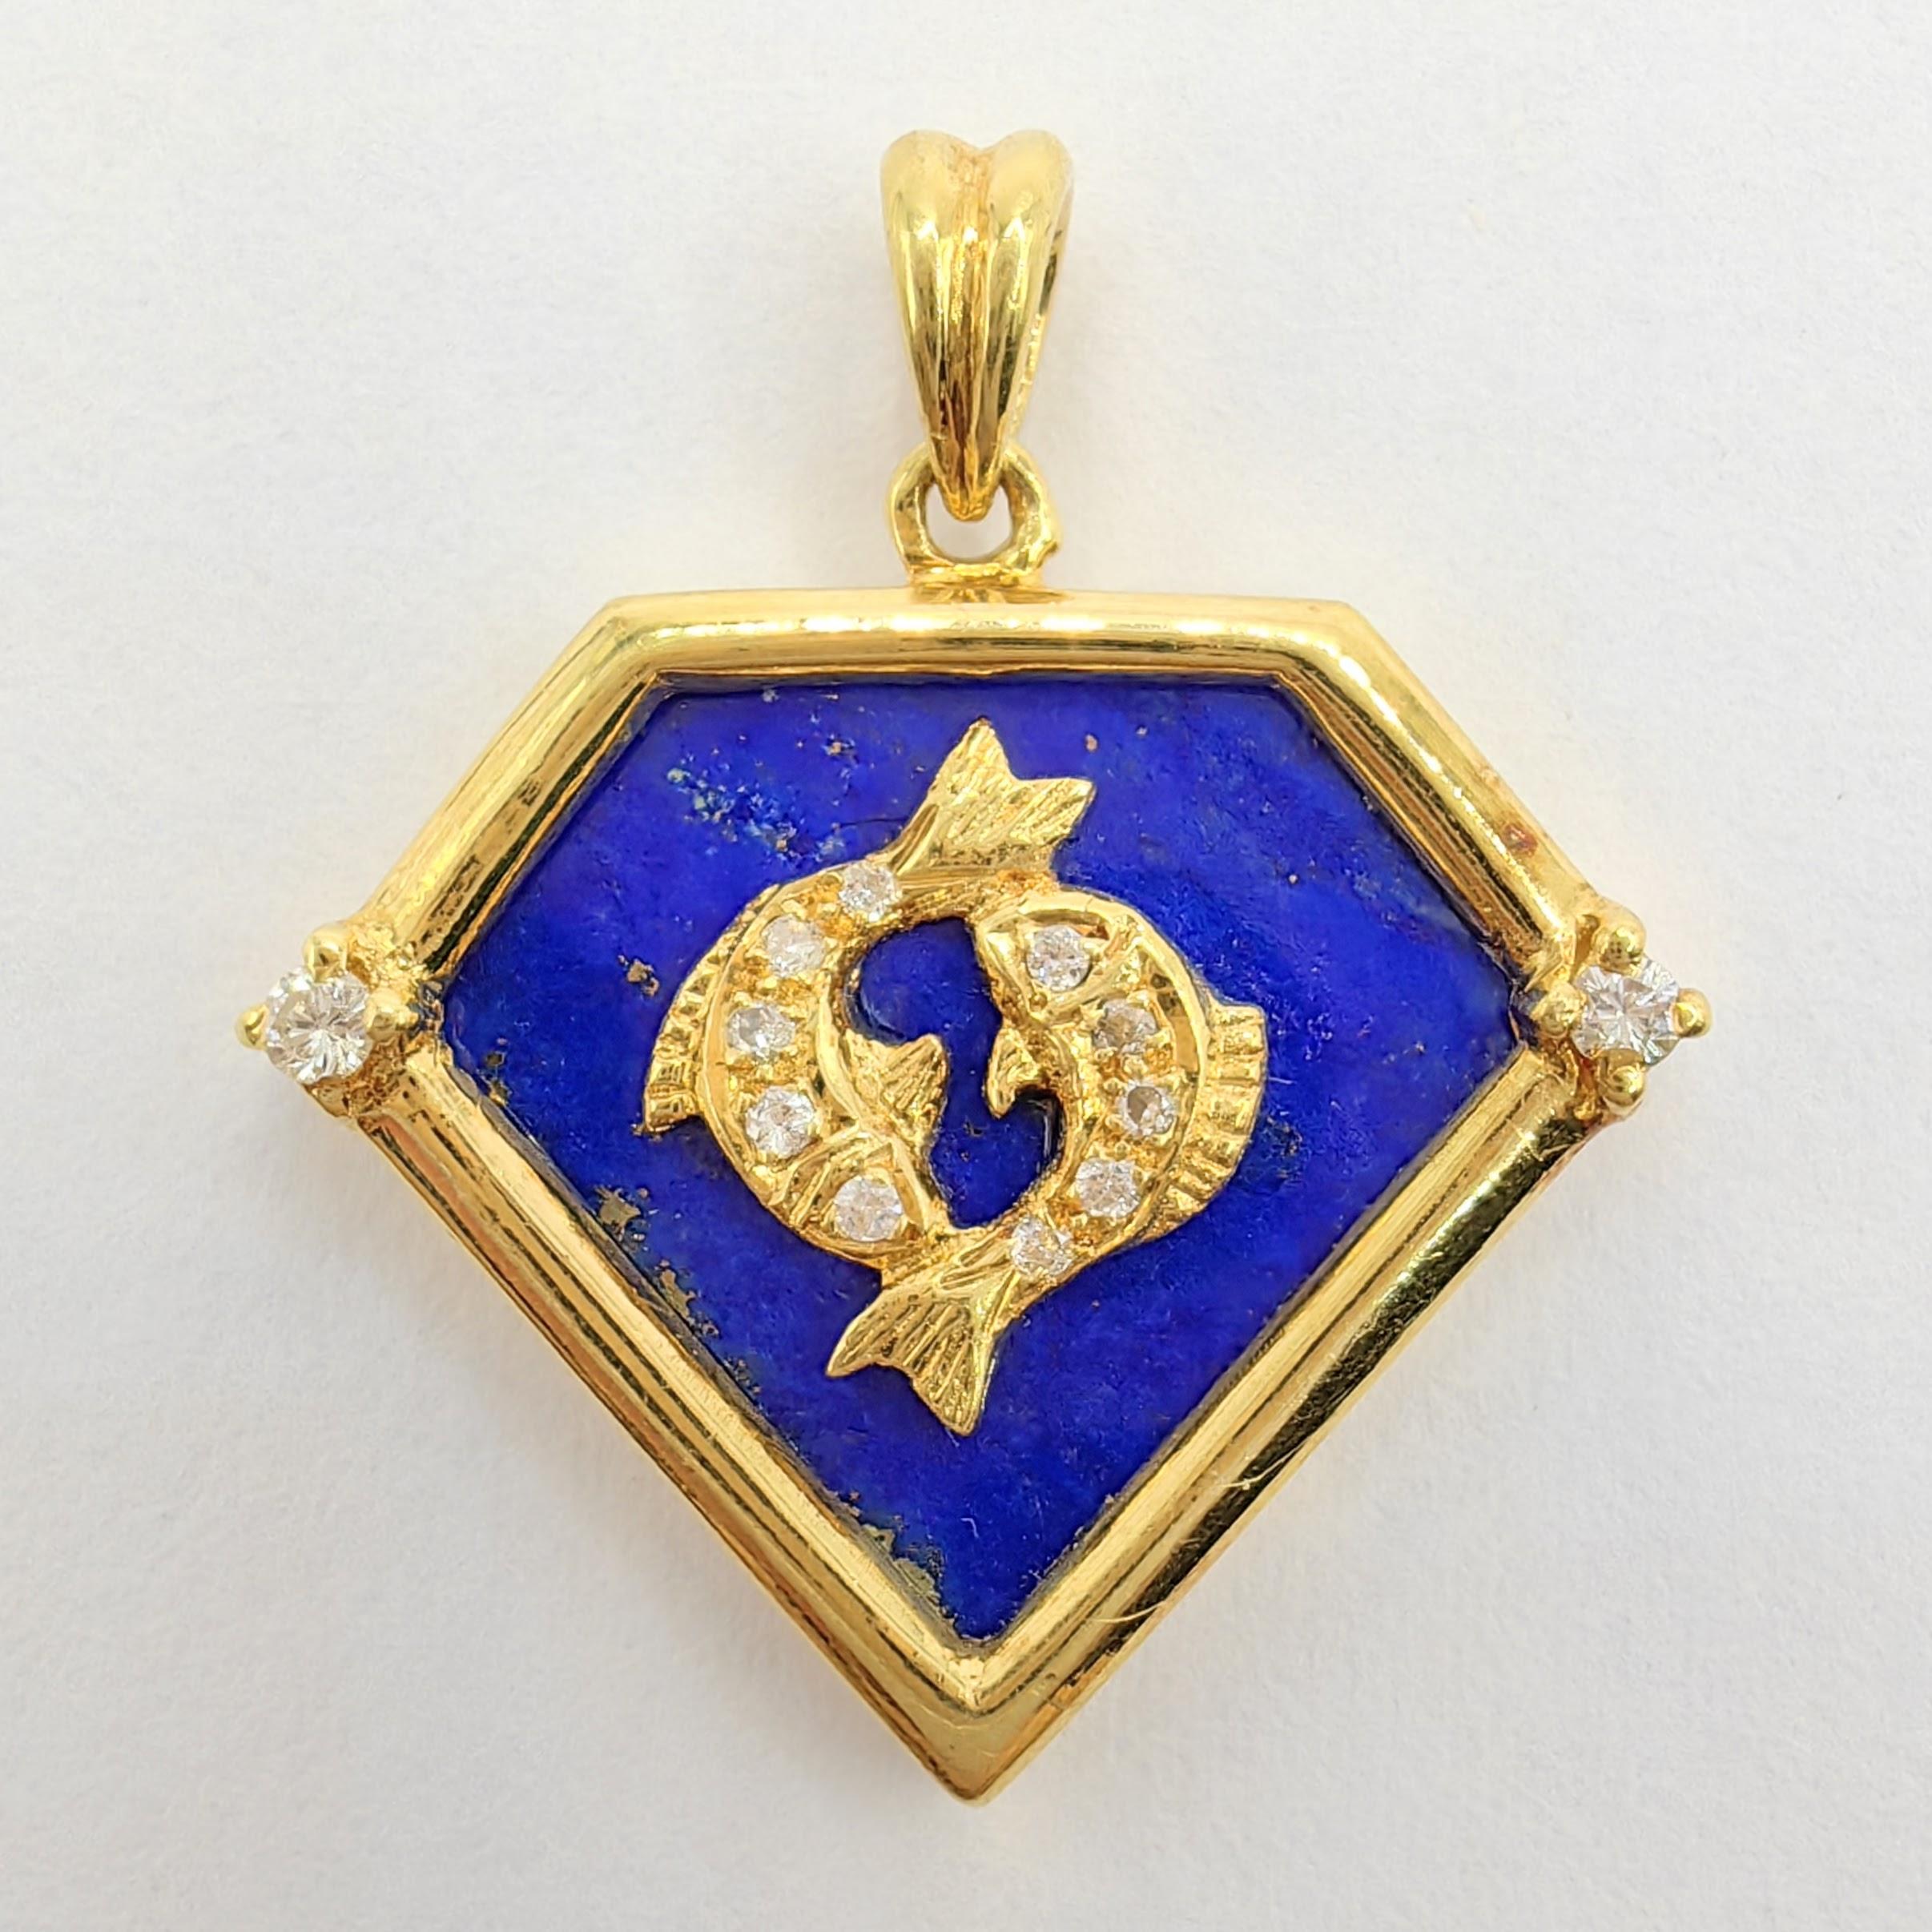 Introducing the Vintage 90's Pisces Blue Lapis Diamond Necklace Pendant in 20K Yellow Gold. This pendant is a true embodiment of celestial beauty and timeless elegance.

At the heart of this pendant lies a beautifully crafted Pisces zodiac motif in